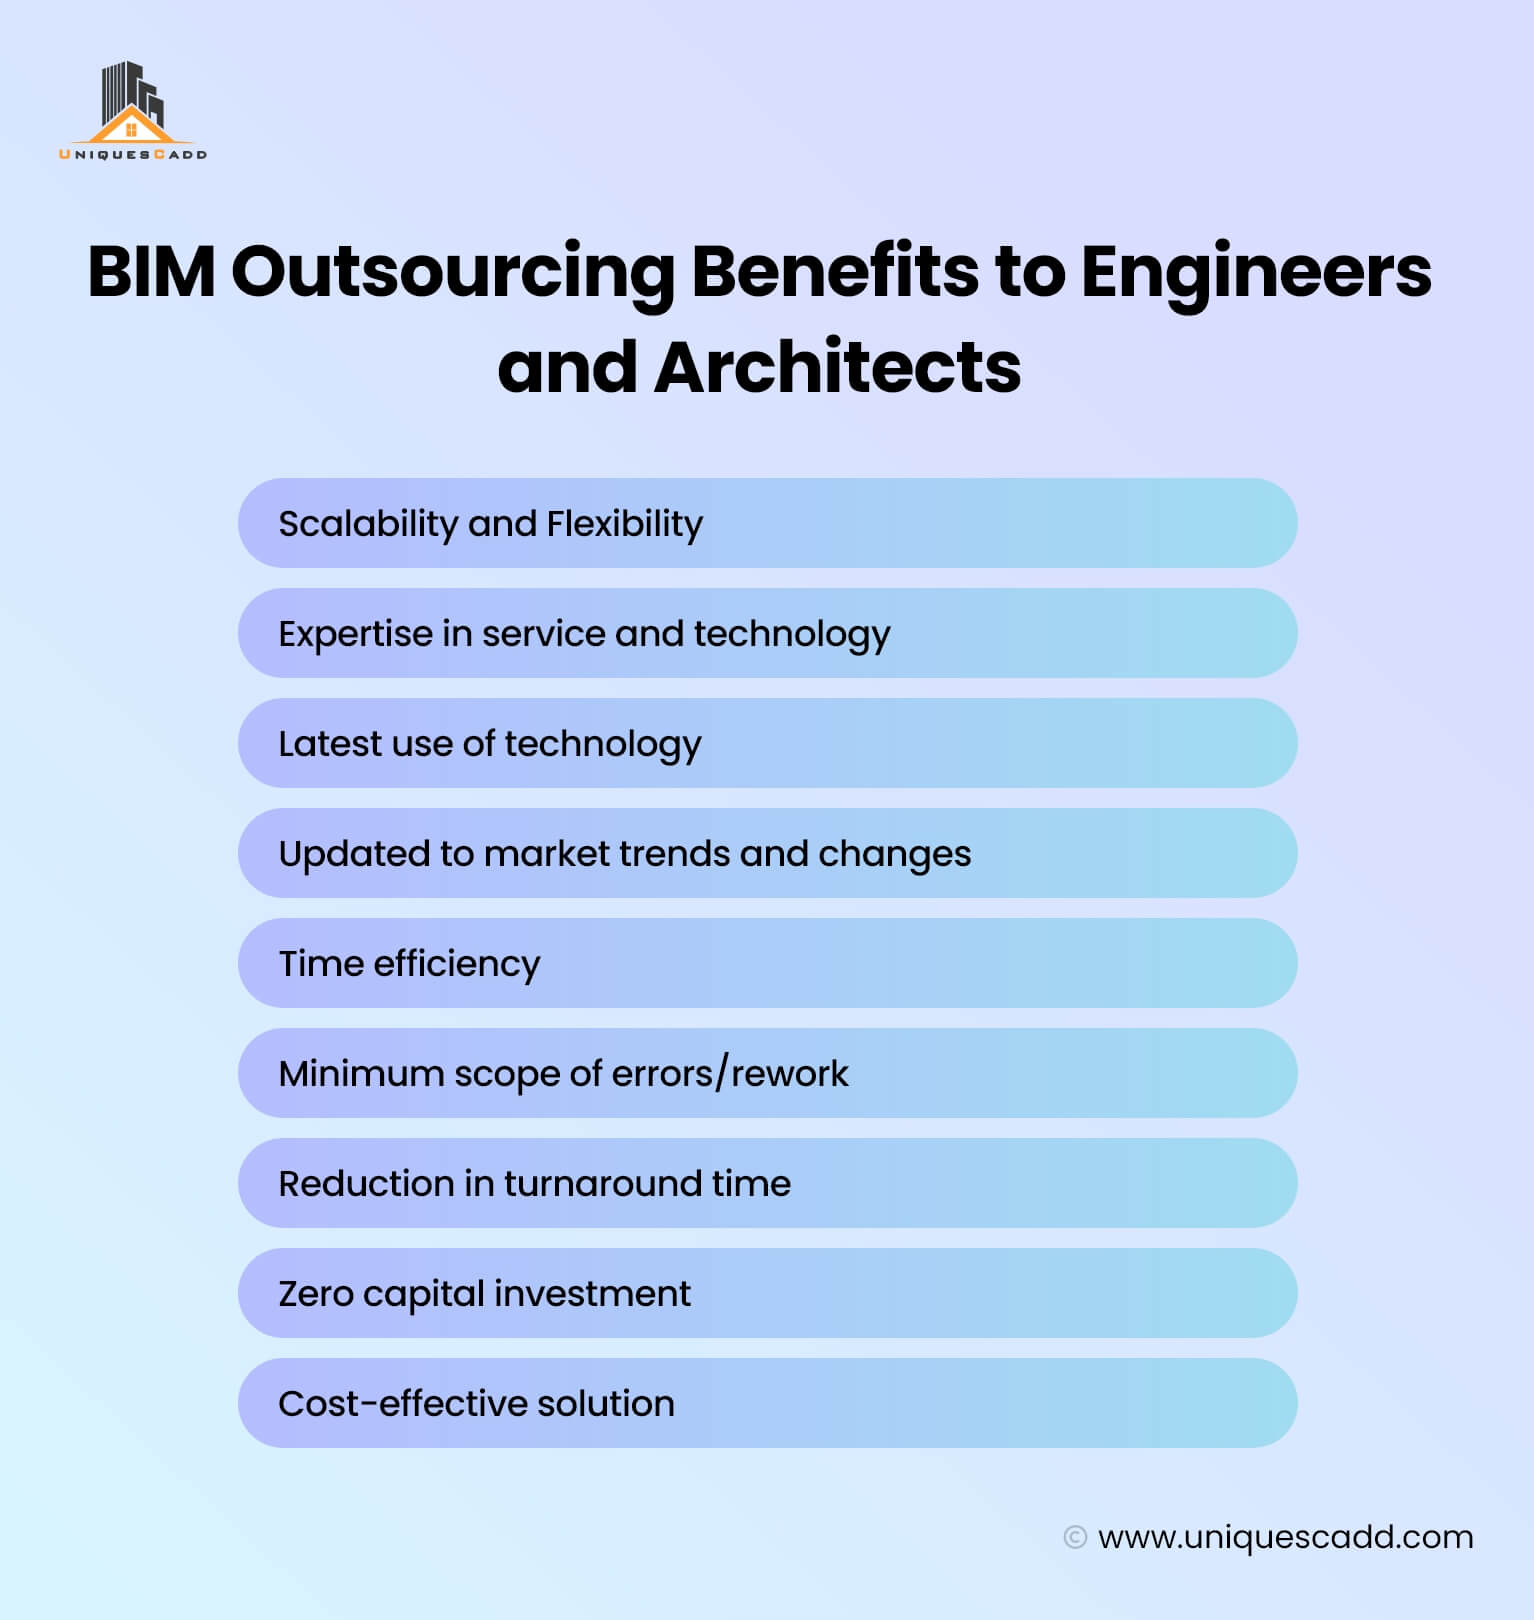 BIM Outsourcing Benefits to Engineers and Architects